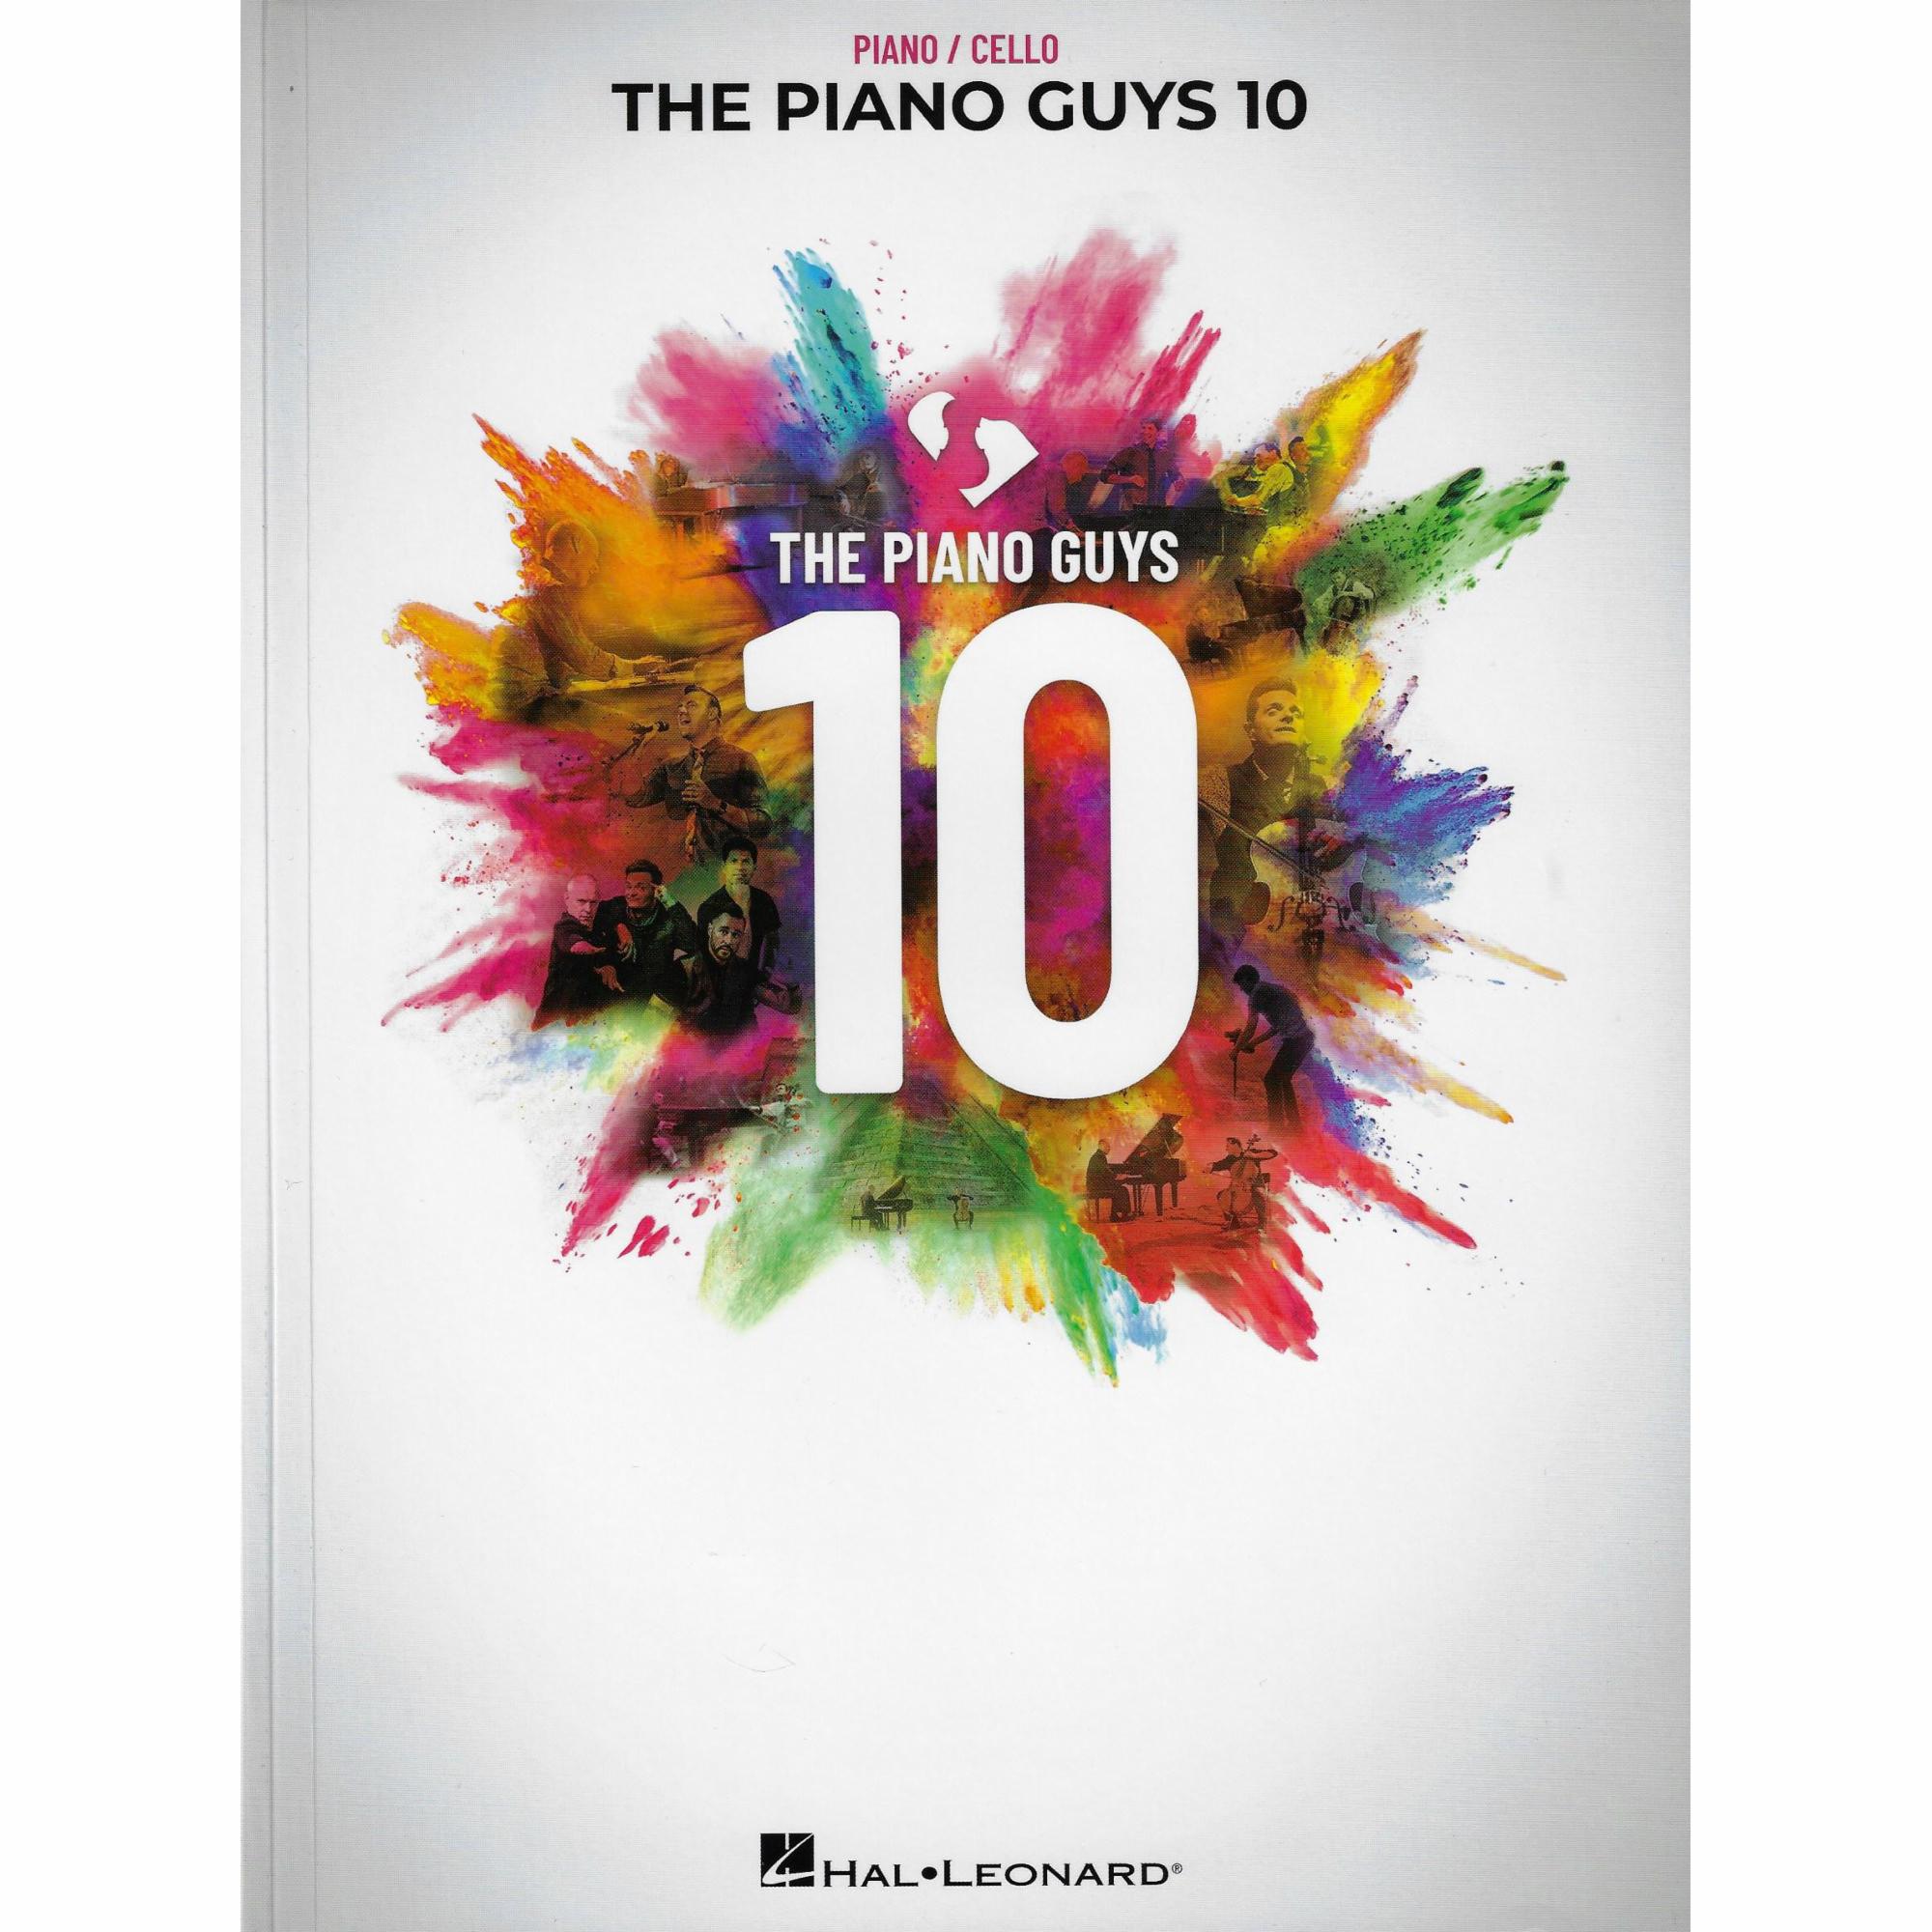 The Piano Guys 10 for Cello and Piano